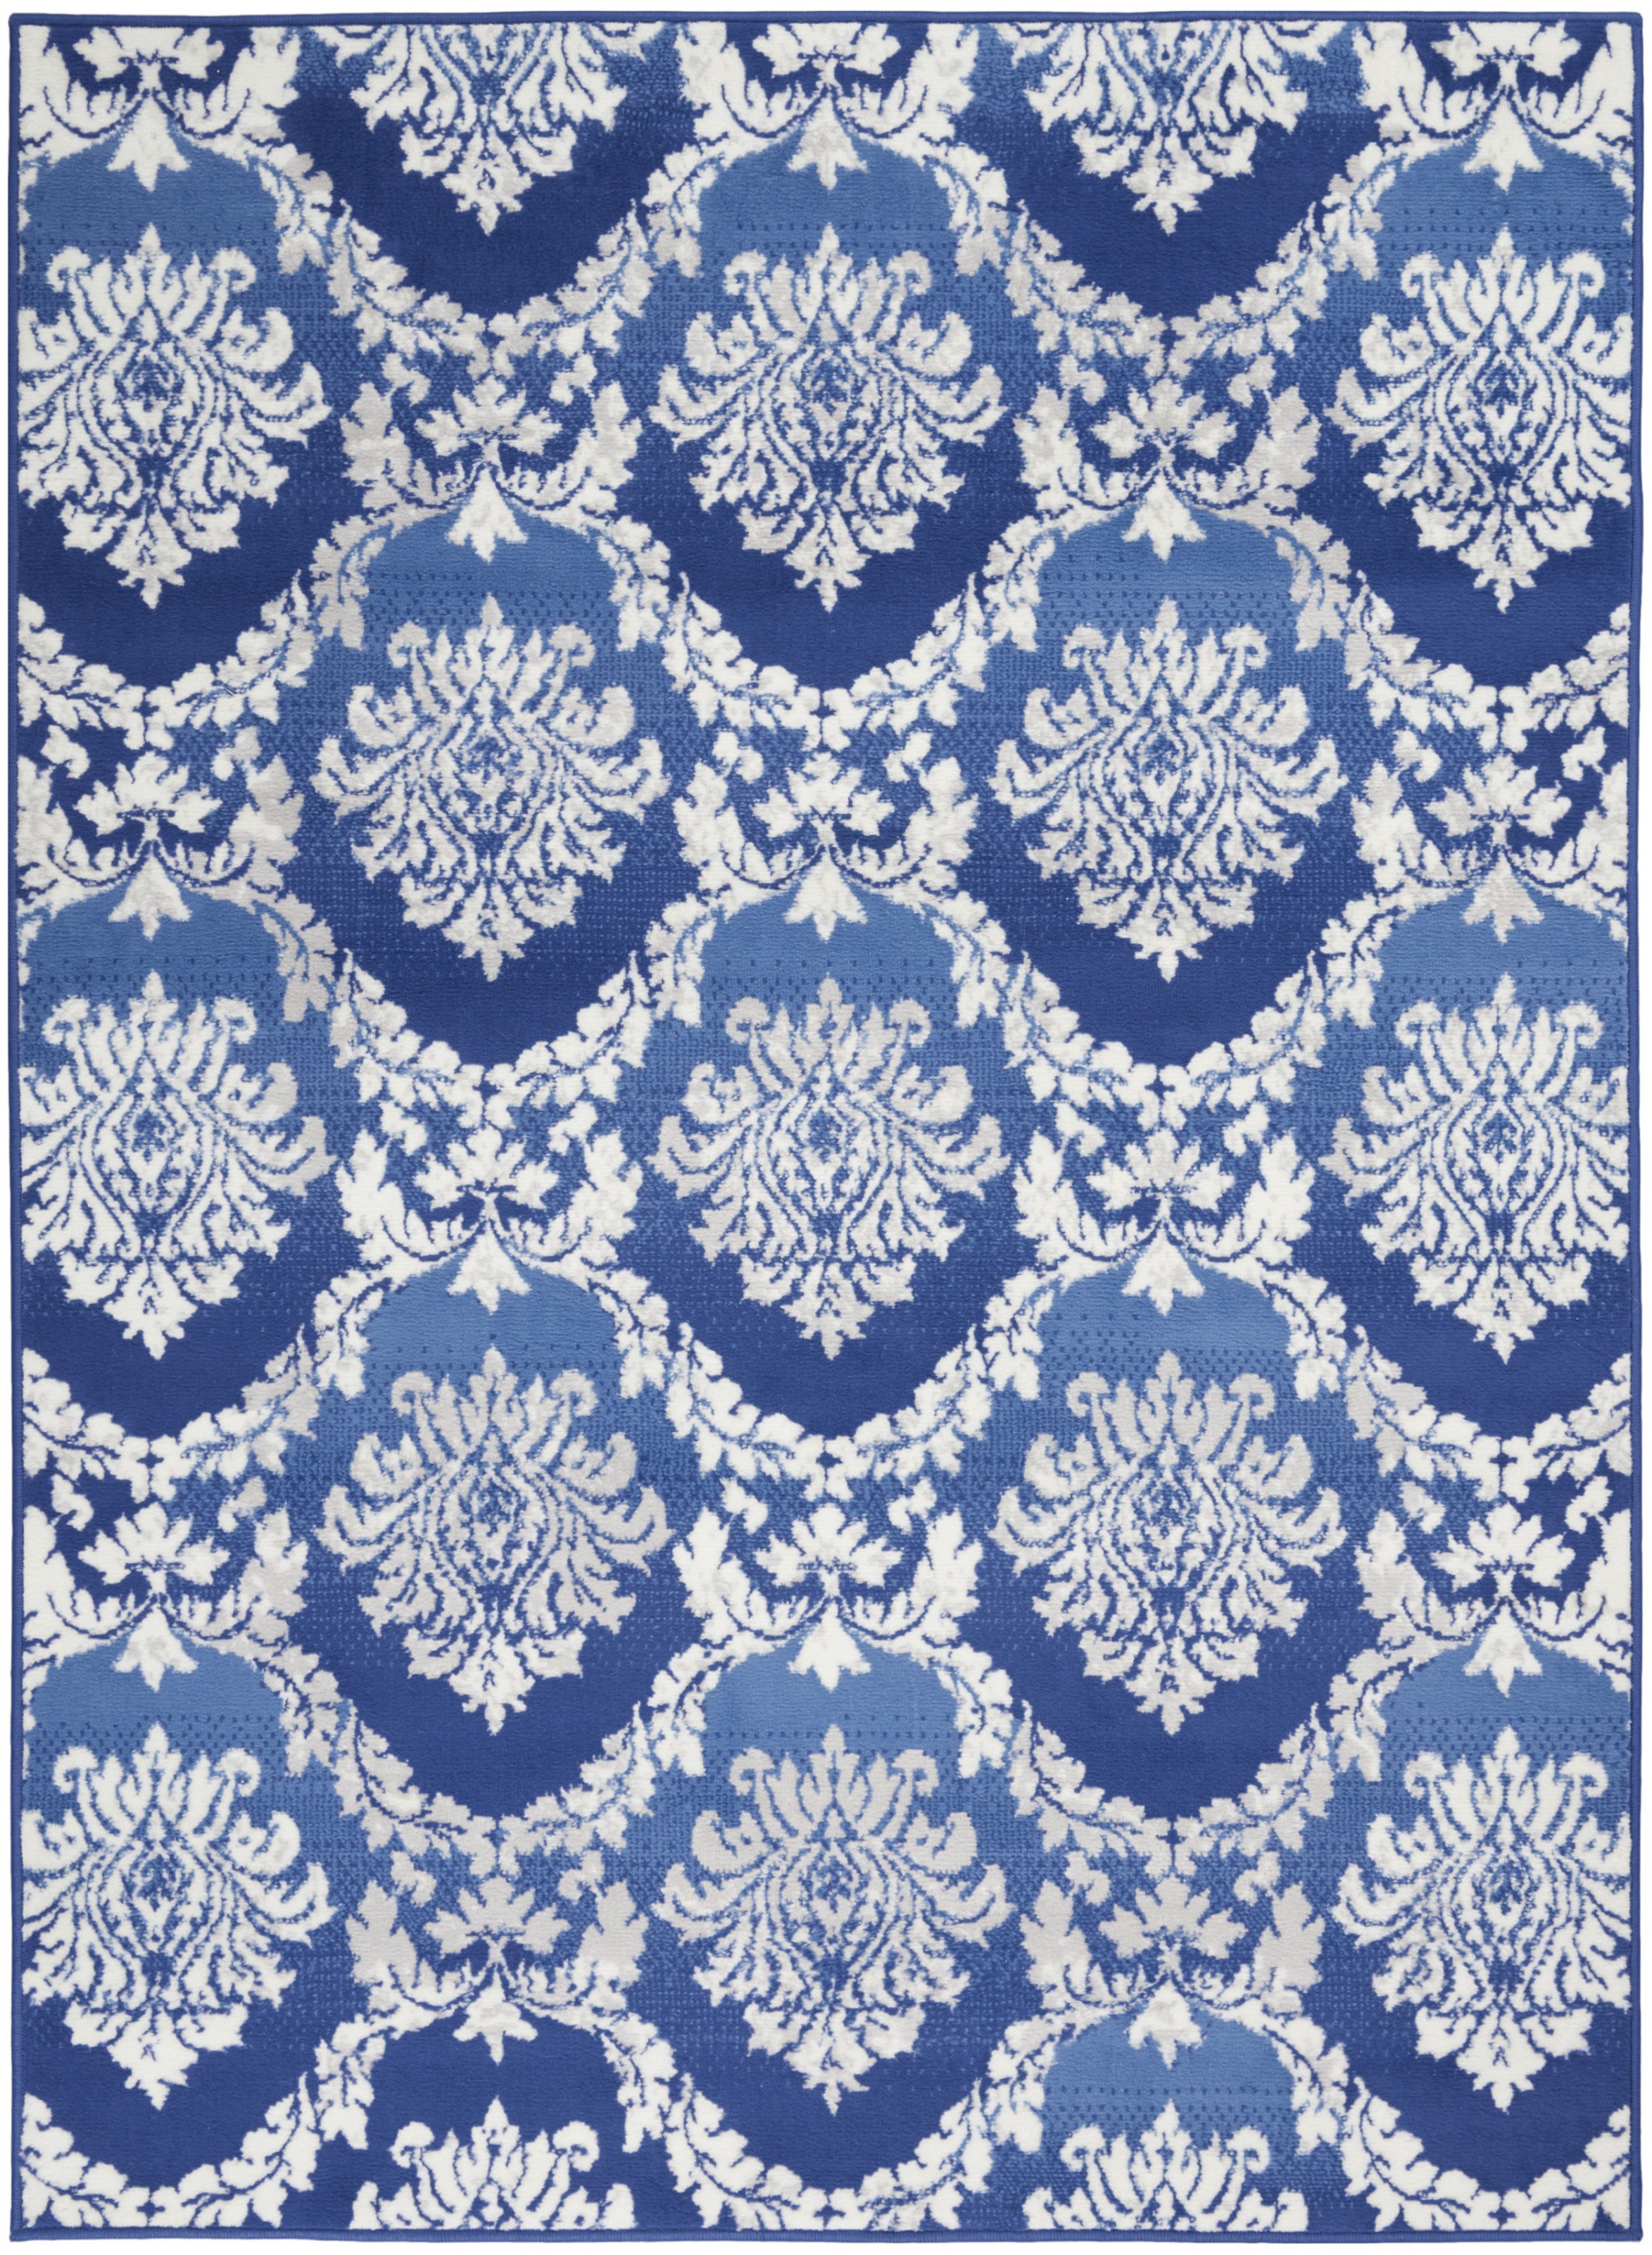 5' X 7' Blue Floral Dhurrie Area Rug-385820-1